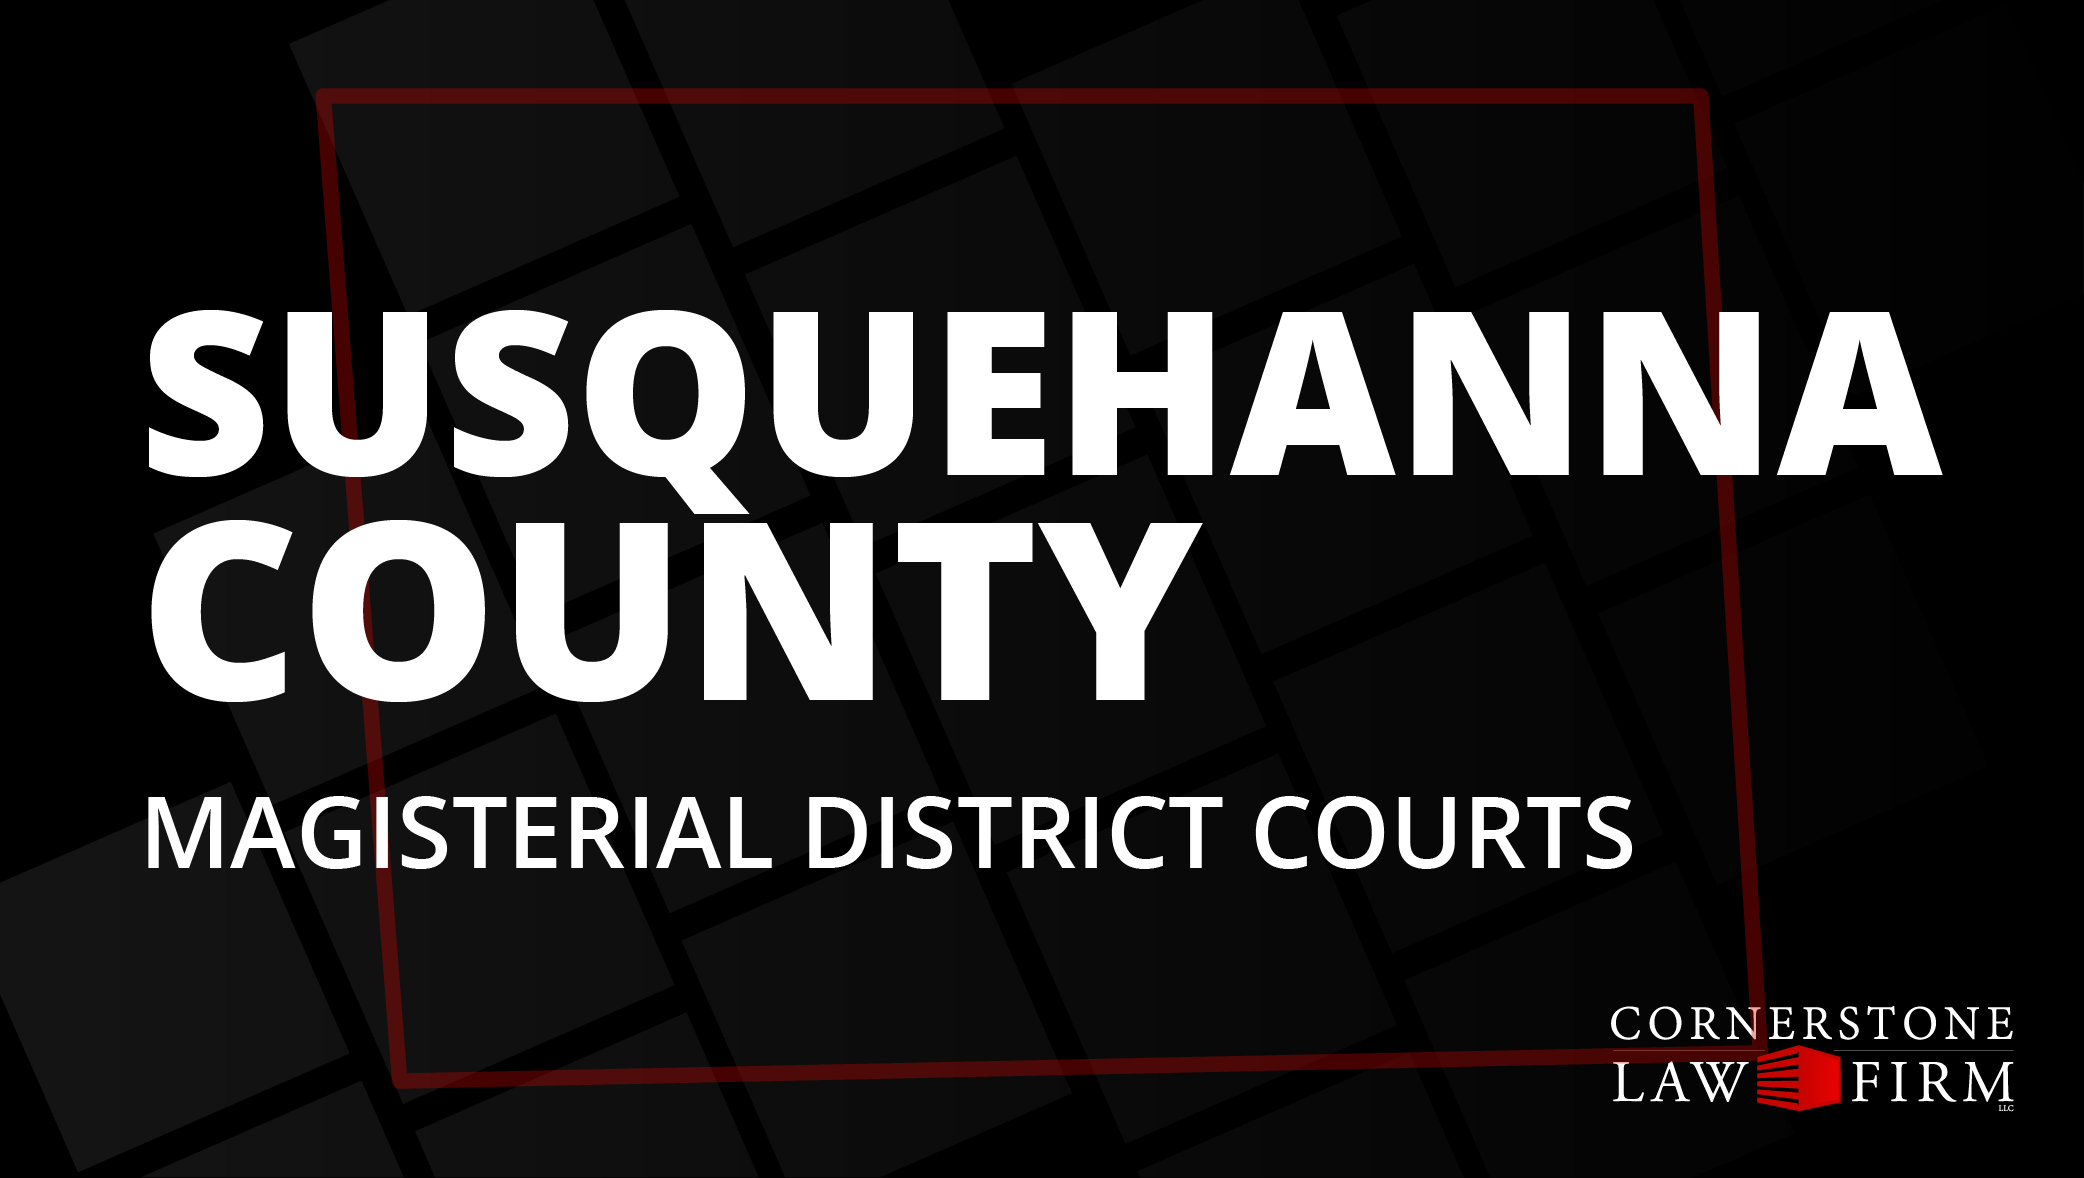 The words "Susquehanna County Magisterial District Courts" over a black background with a faded red outline of the county.